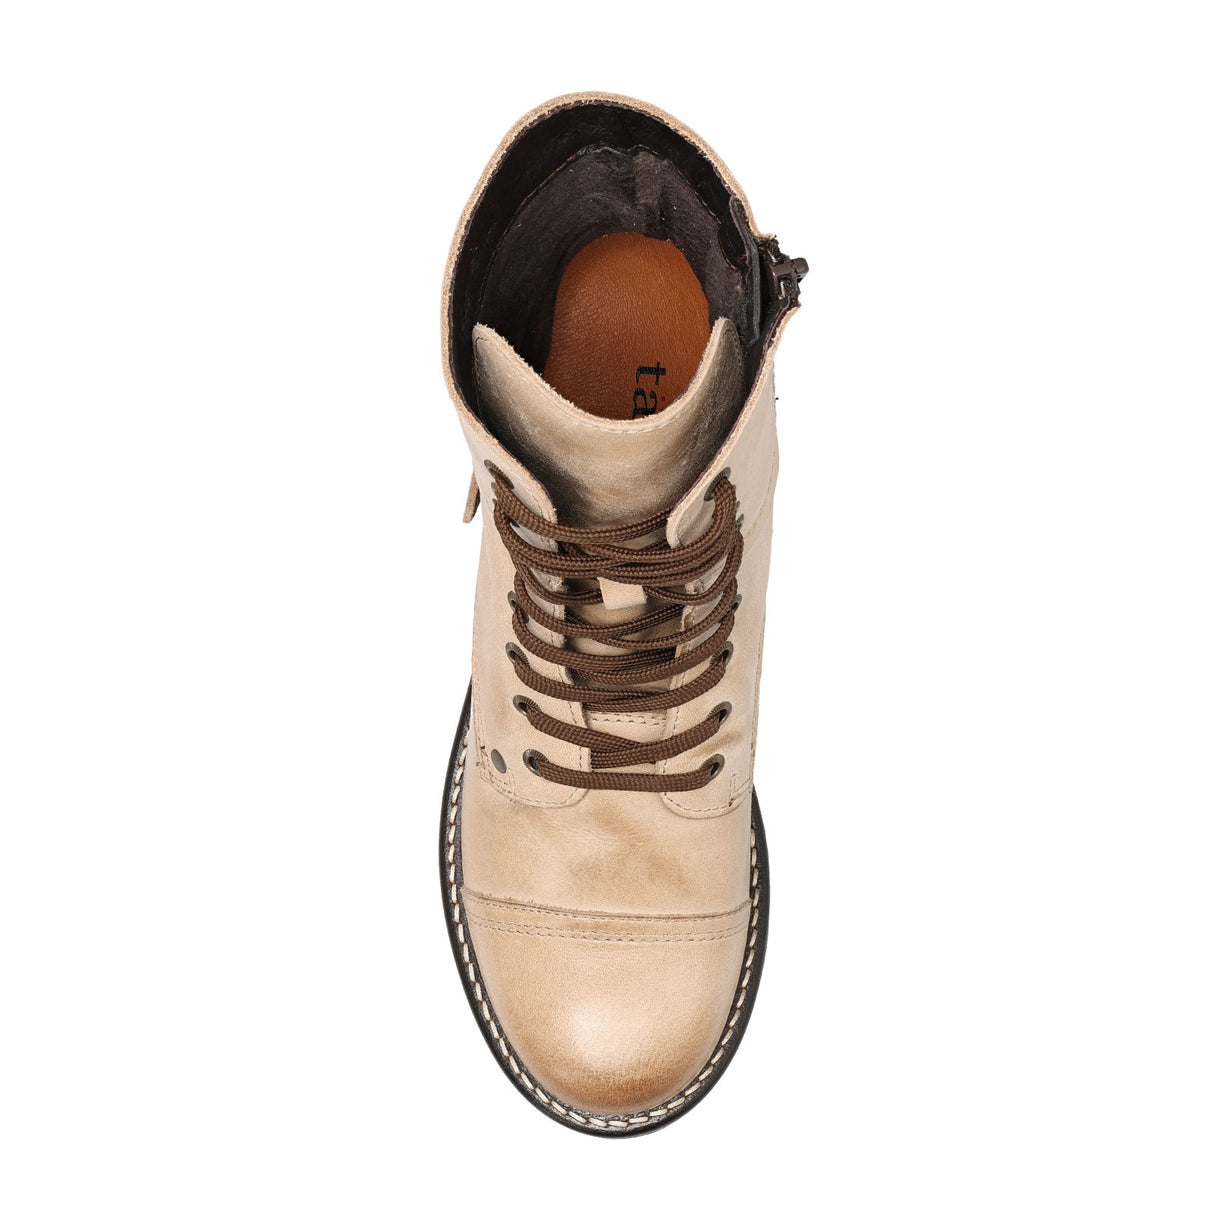 Taos Crave Lace Up Mid Boot (Women) - Stone Leather Boots - Casual - Mid - The Heel Shoe Fitters